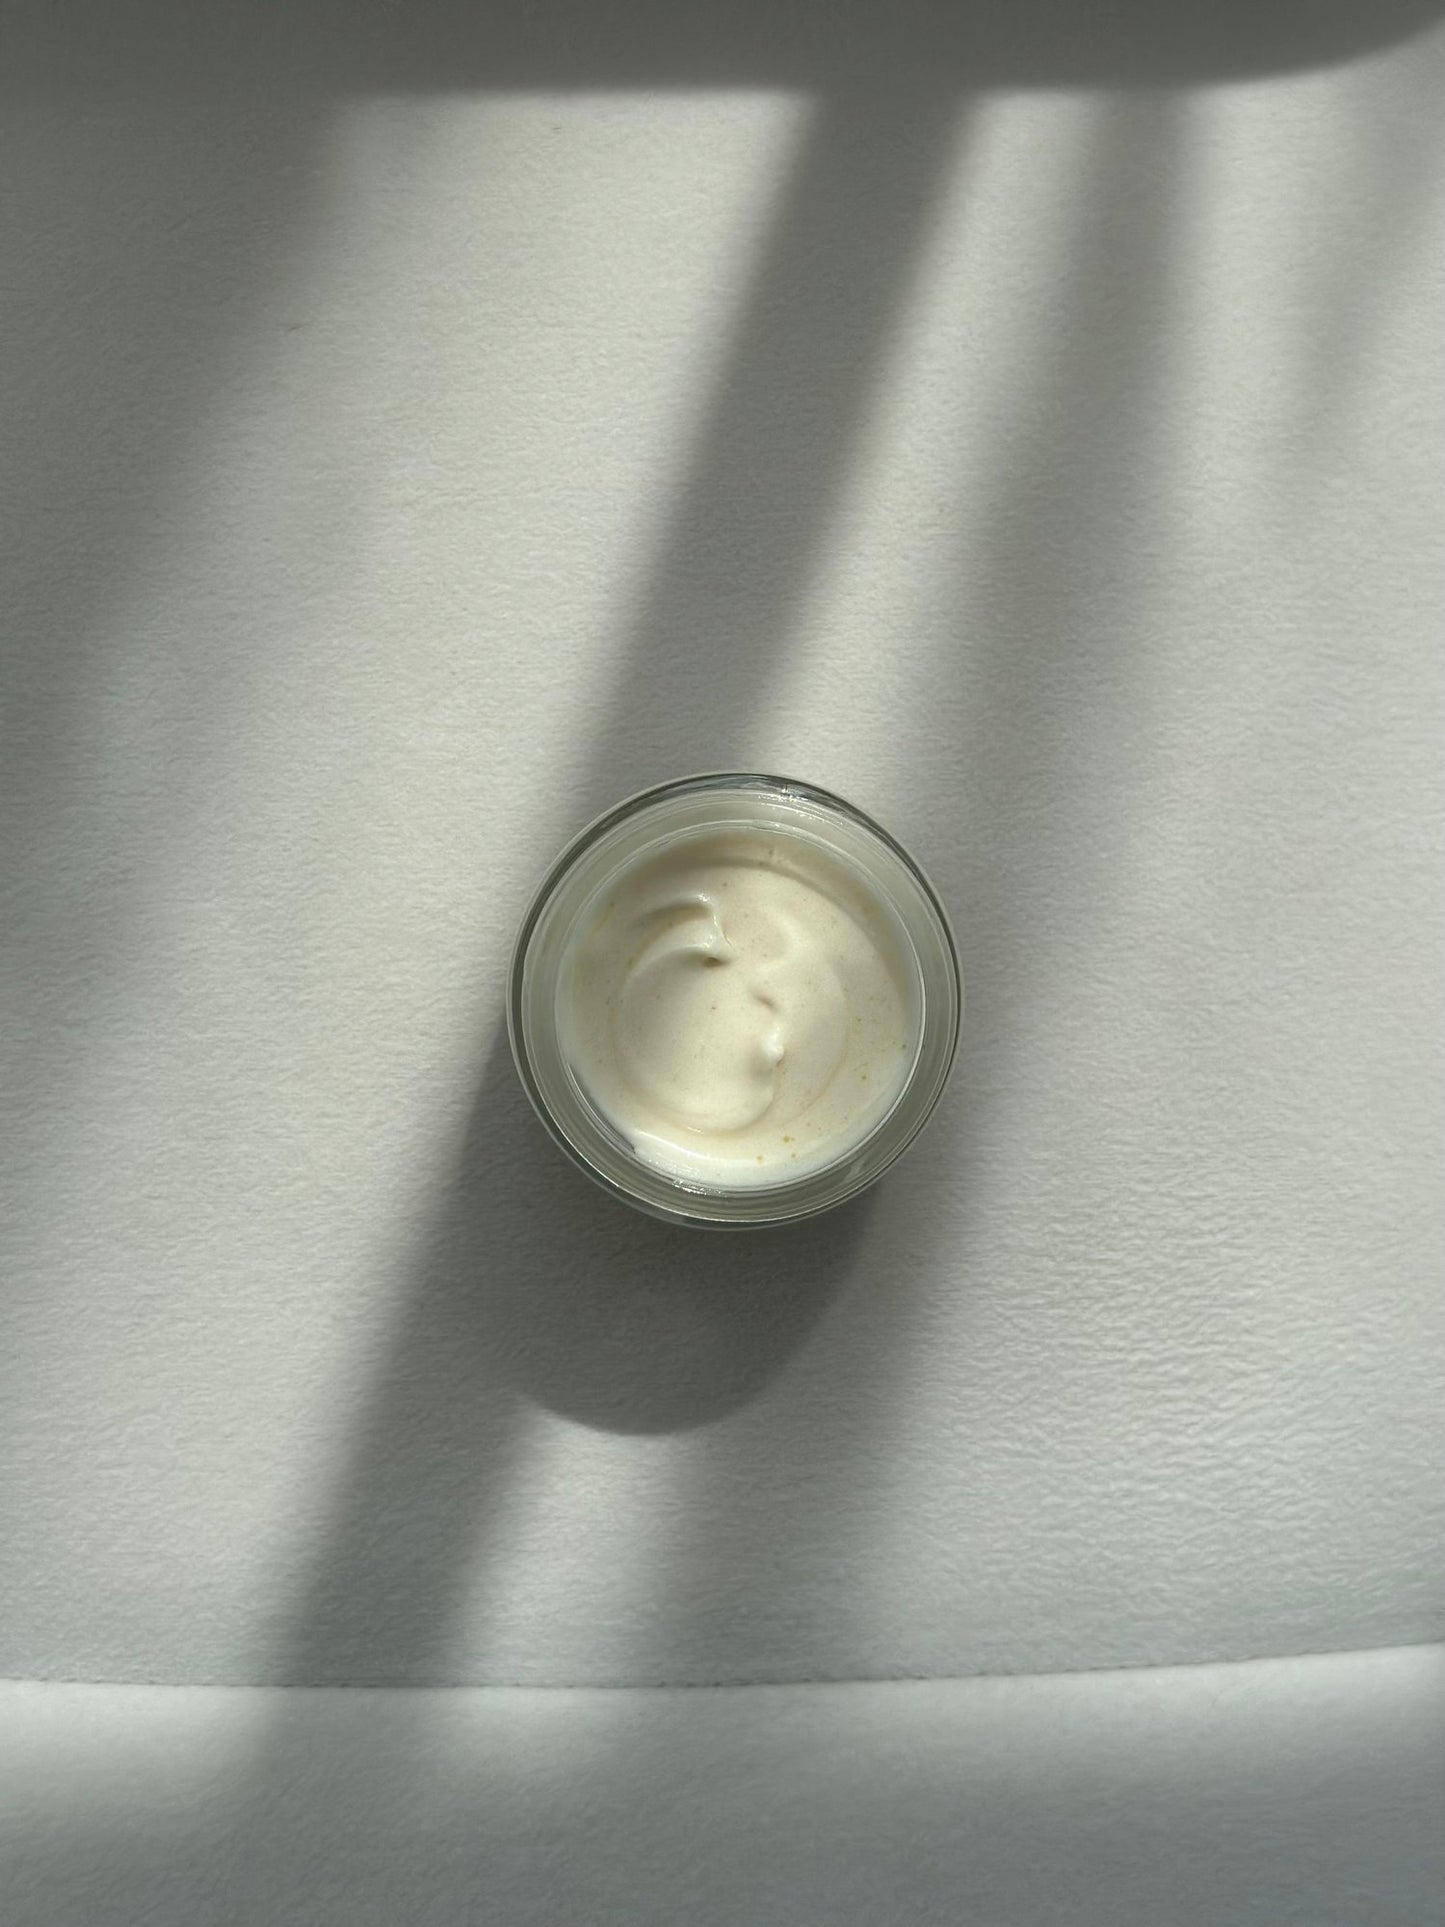 Whipped Tallow